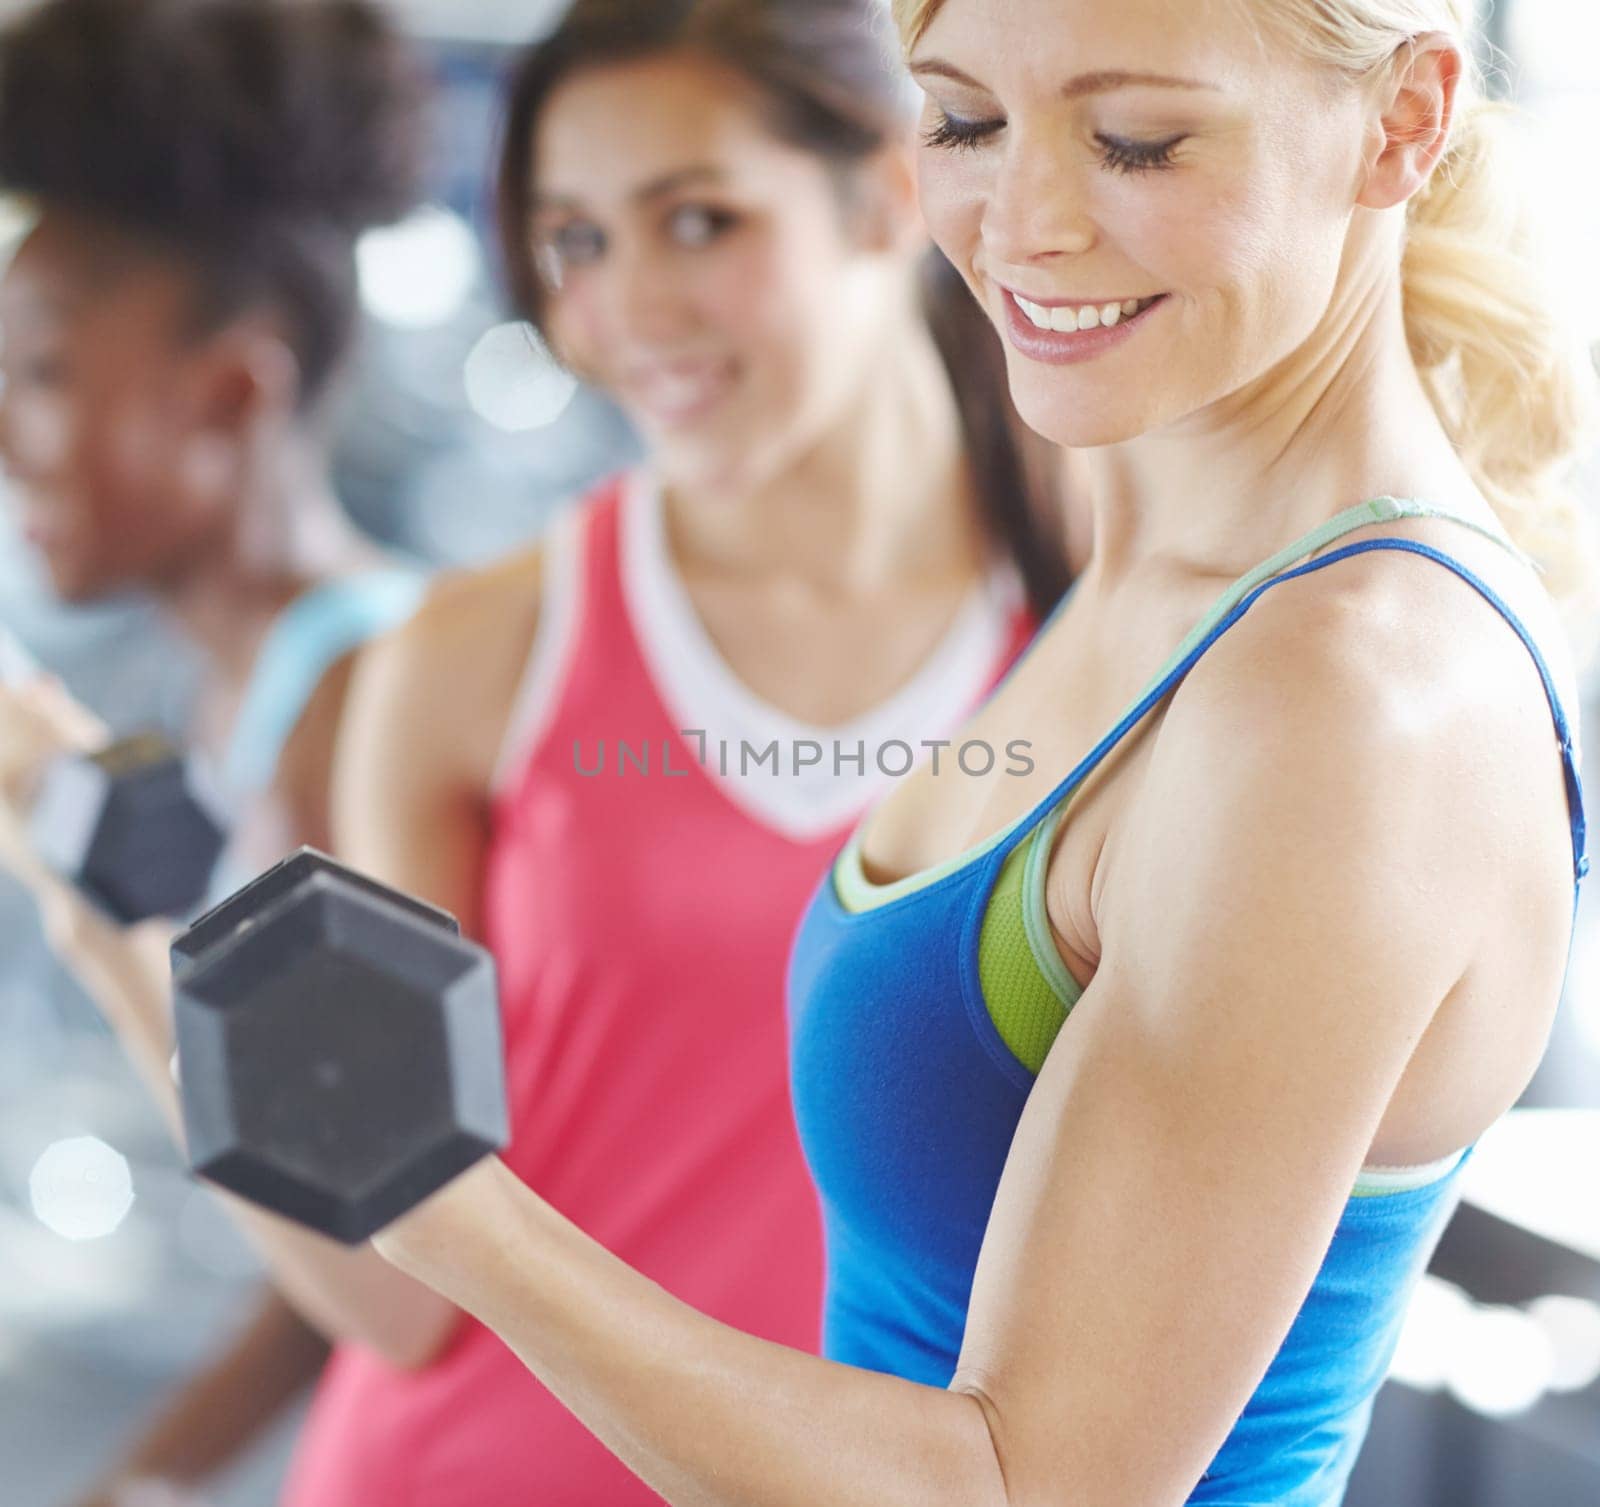 Woman, dumbbell and gym exercise or weightlifting workout for bicep growth or muscle, arms or strong. Female person, friends and fitness training for wellness goals in group class, health or smile.